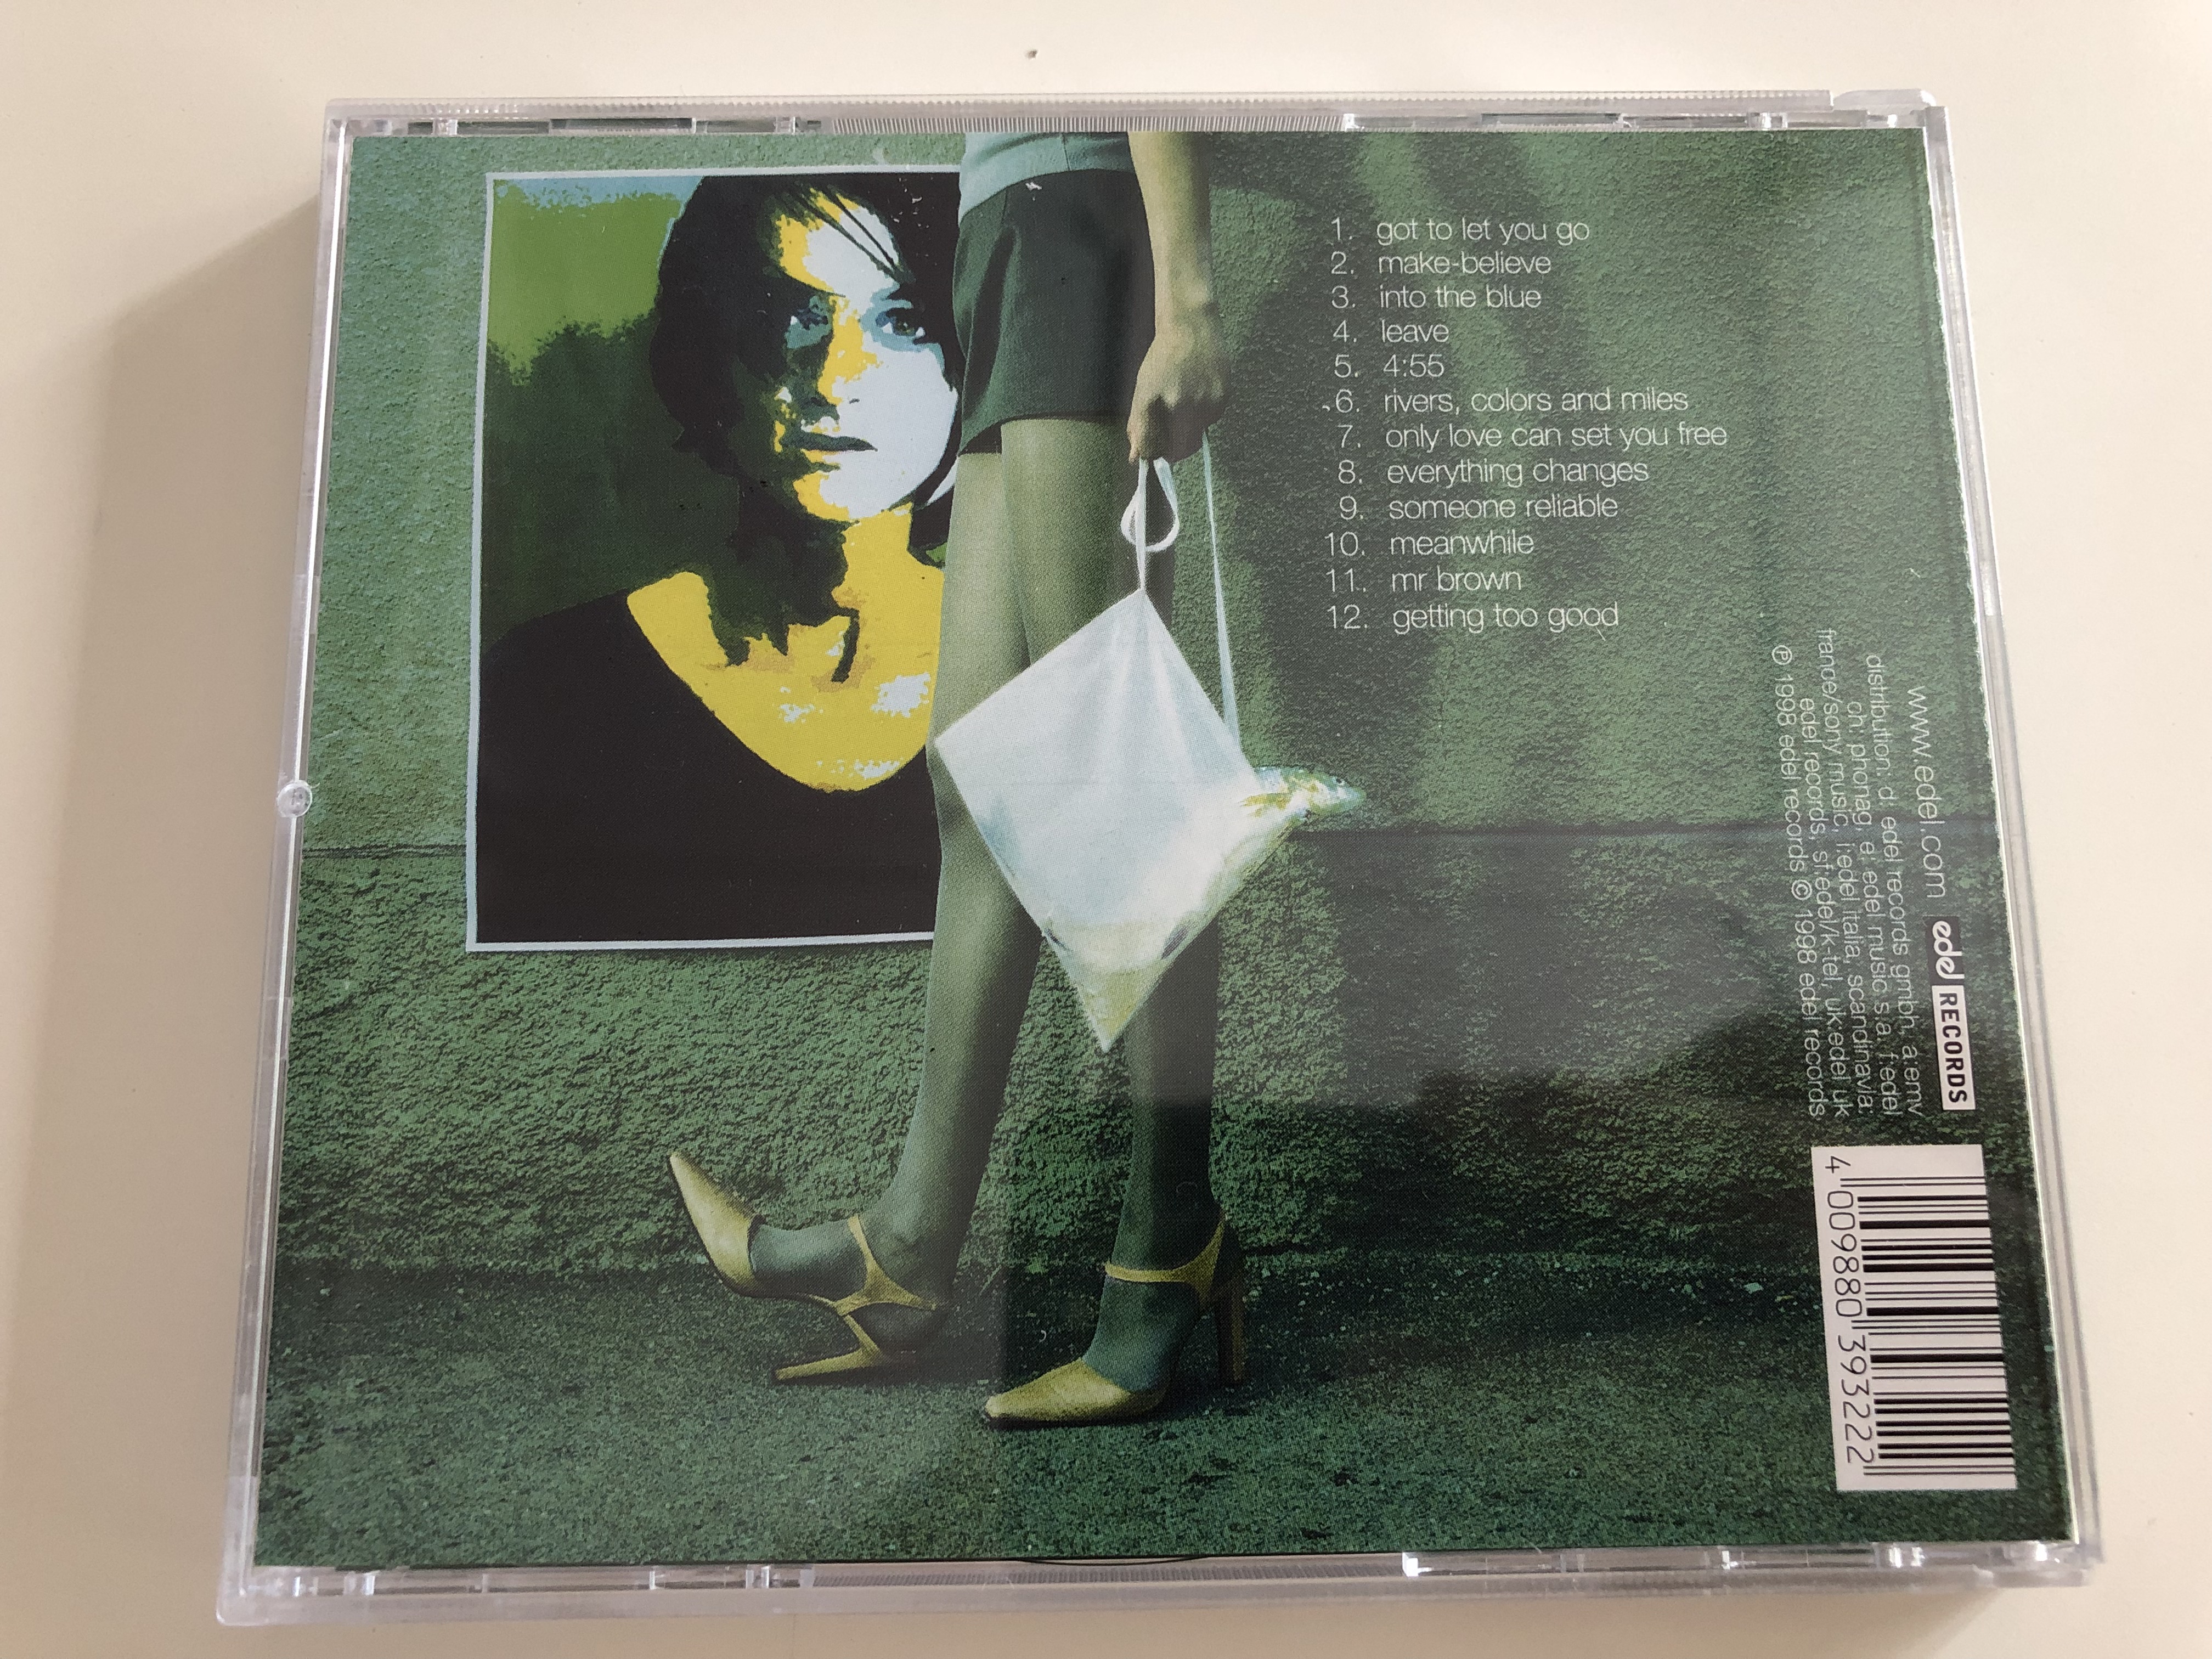 jade.ell-promises-and-prayers-make-believe-leave-someone-reliable-getting-too-good-audio-cd-1998-39322ere-10-.jpg